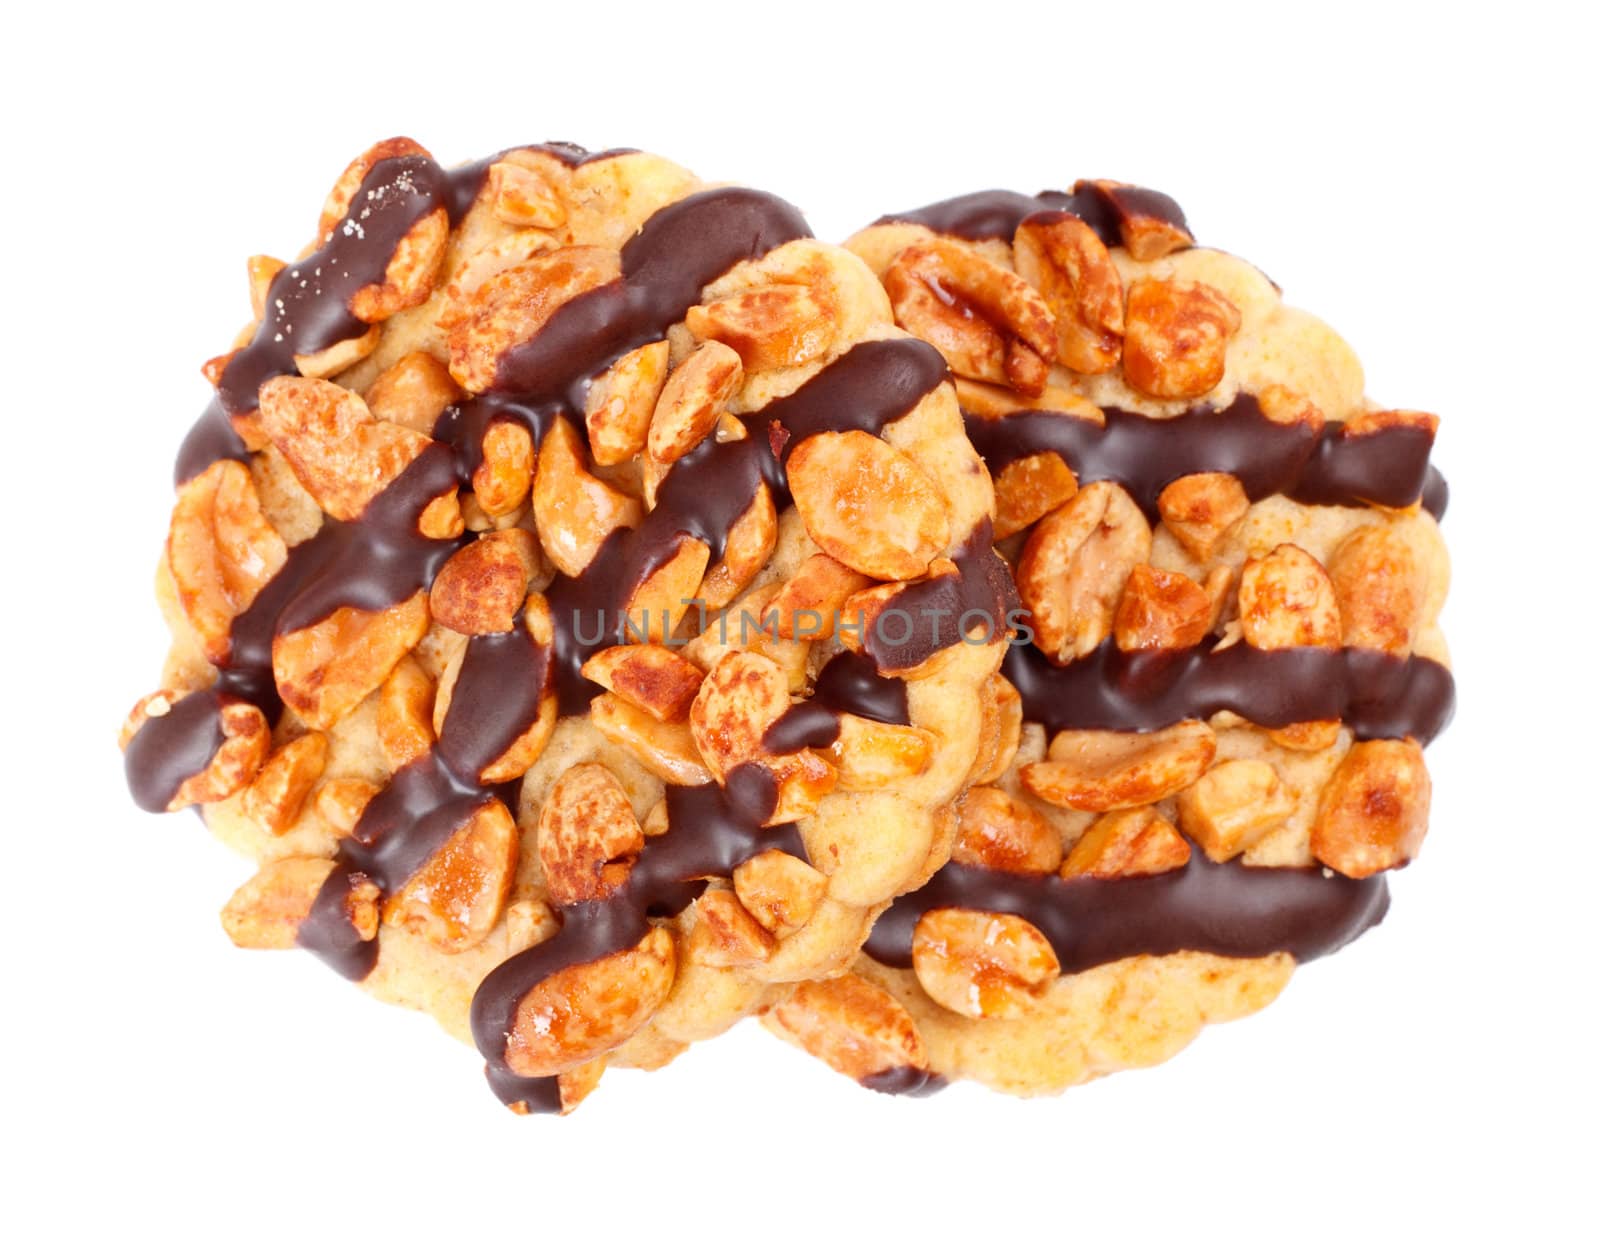 chocolate chip cookies with peanuts, isolated on white